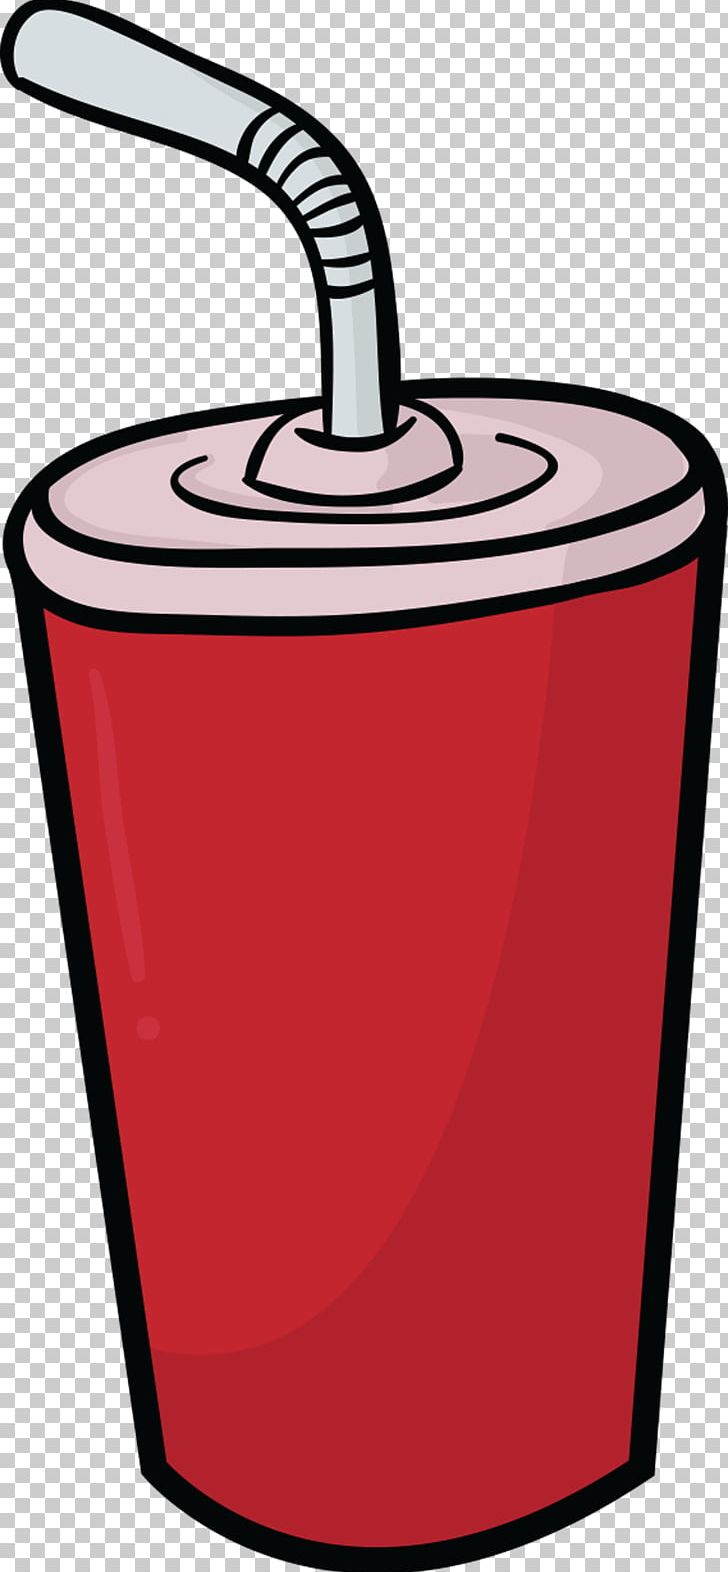 Fizzy Drinks Fast Food Cola Drinking Straw Beverage Can PNG, Clipart, Alcoholic Drink, Beverage Can, Blue, Bottle, Cola Free PNG Download